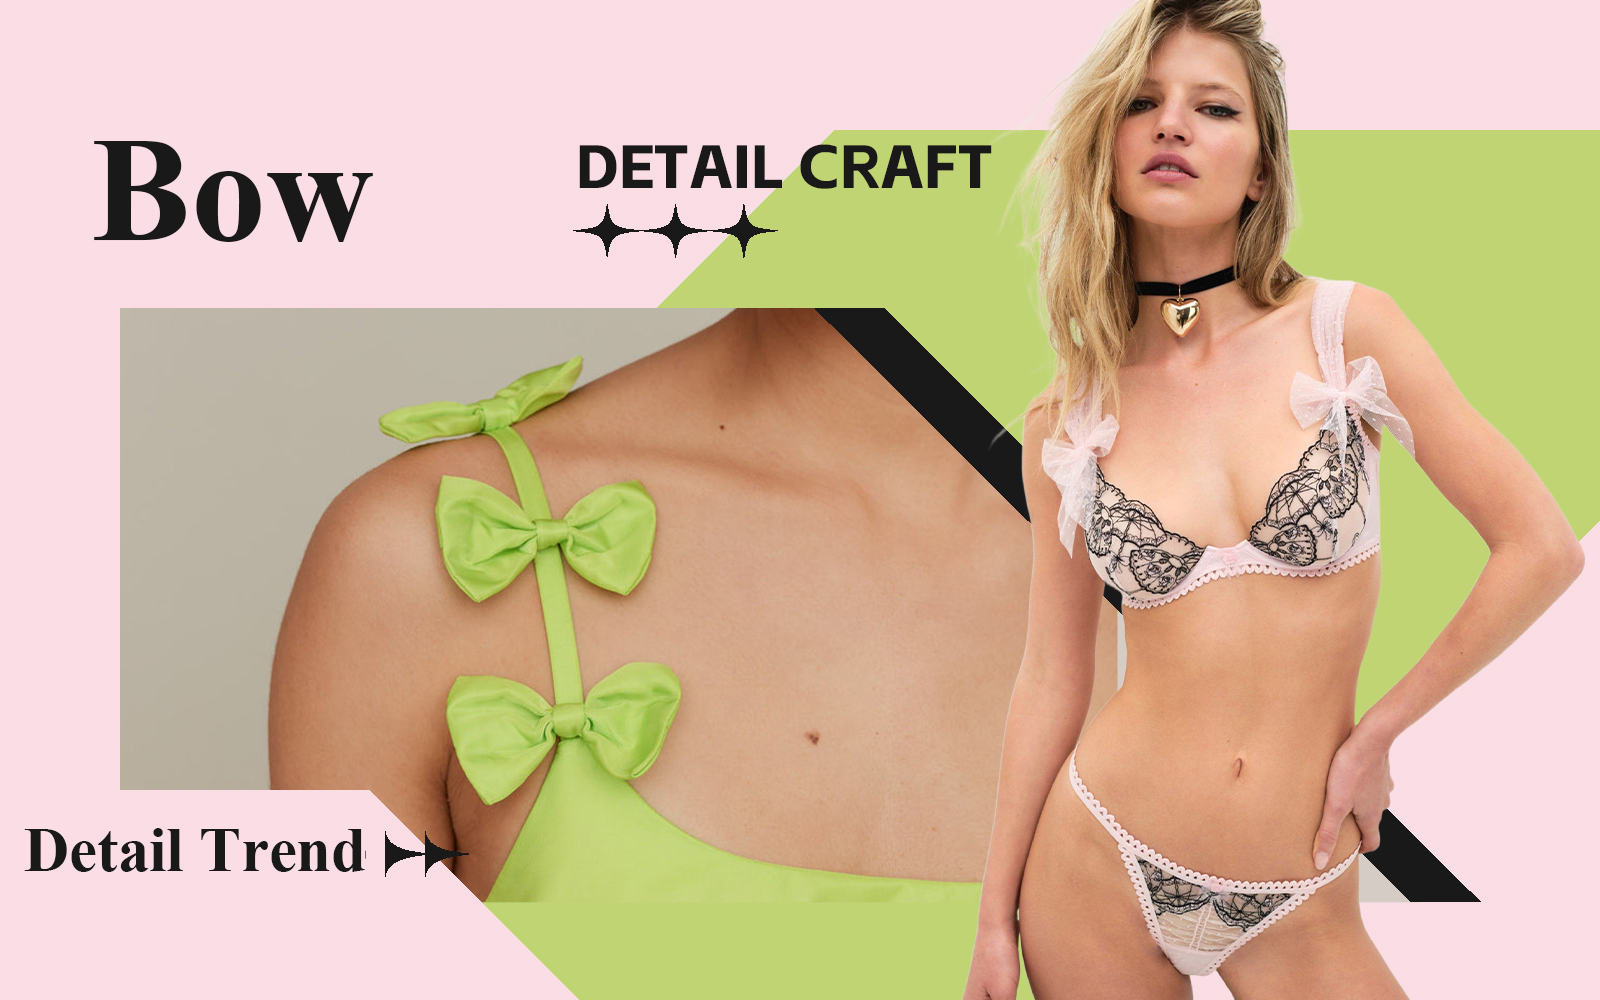 Bow Knot -- The Detail & Craft Trend for Women's Underwear & Homewear